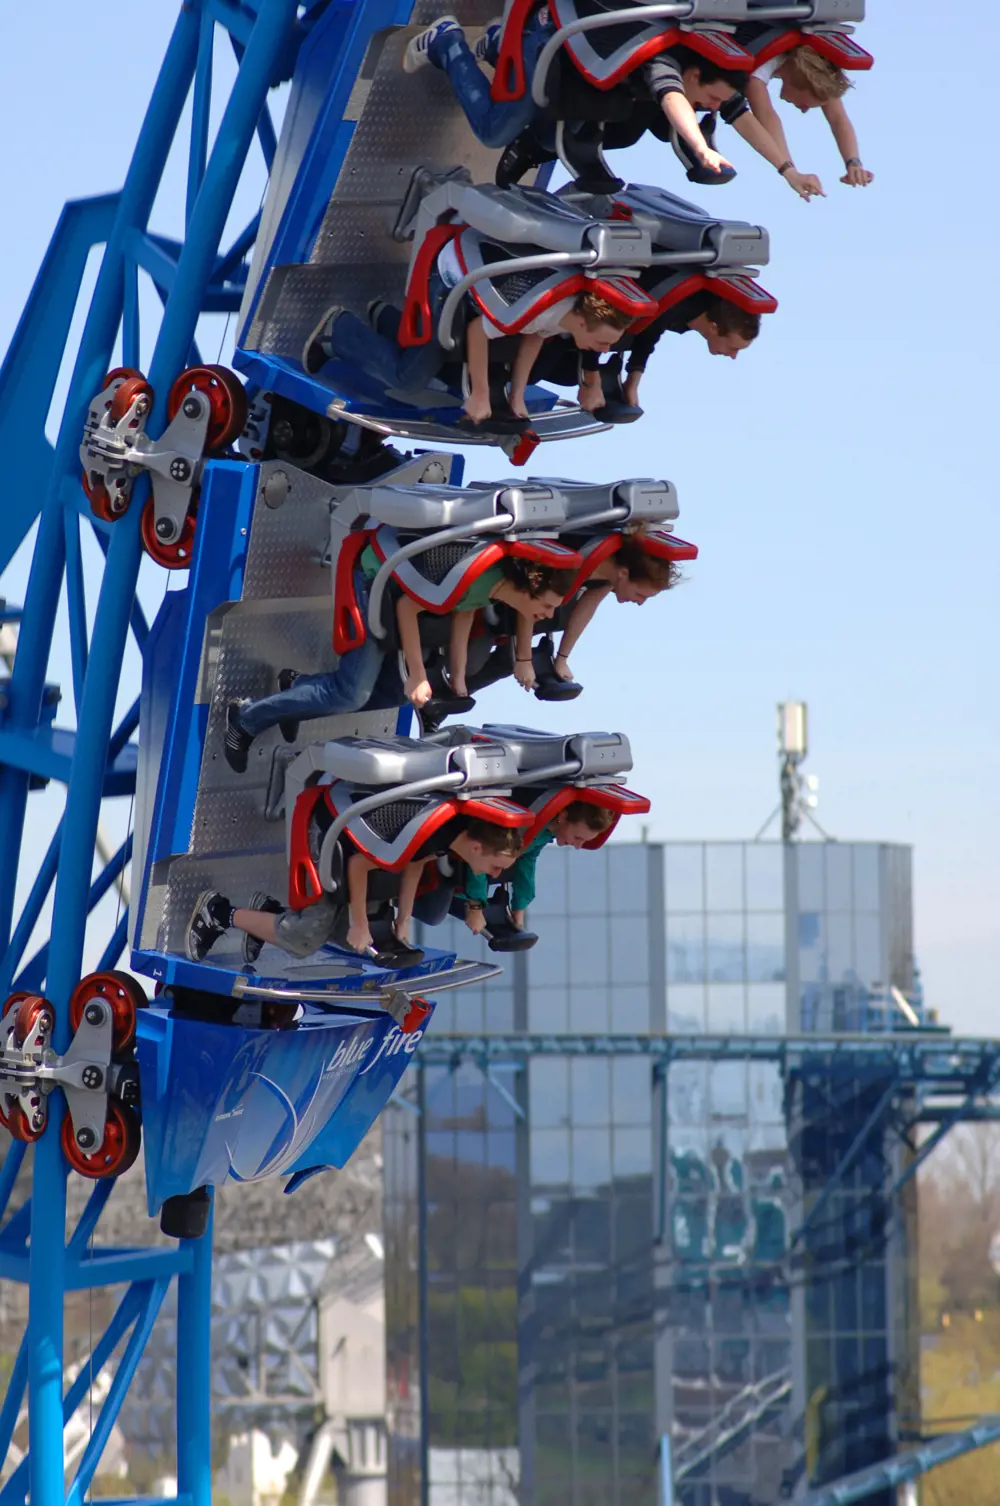 A group of people on the Blue Fire ride rollercoaster.